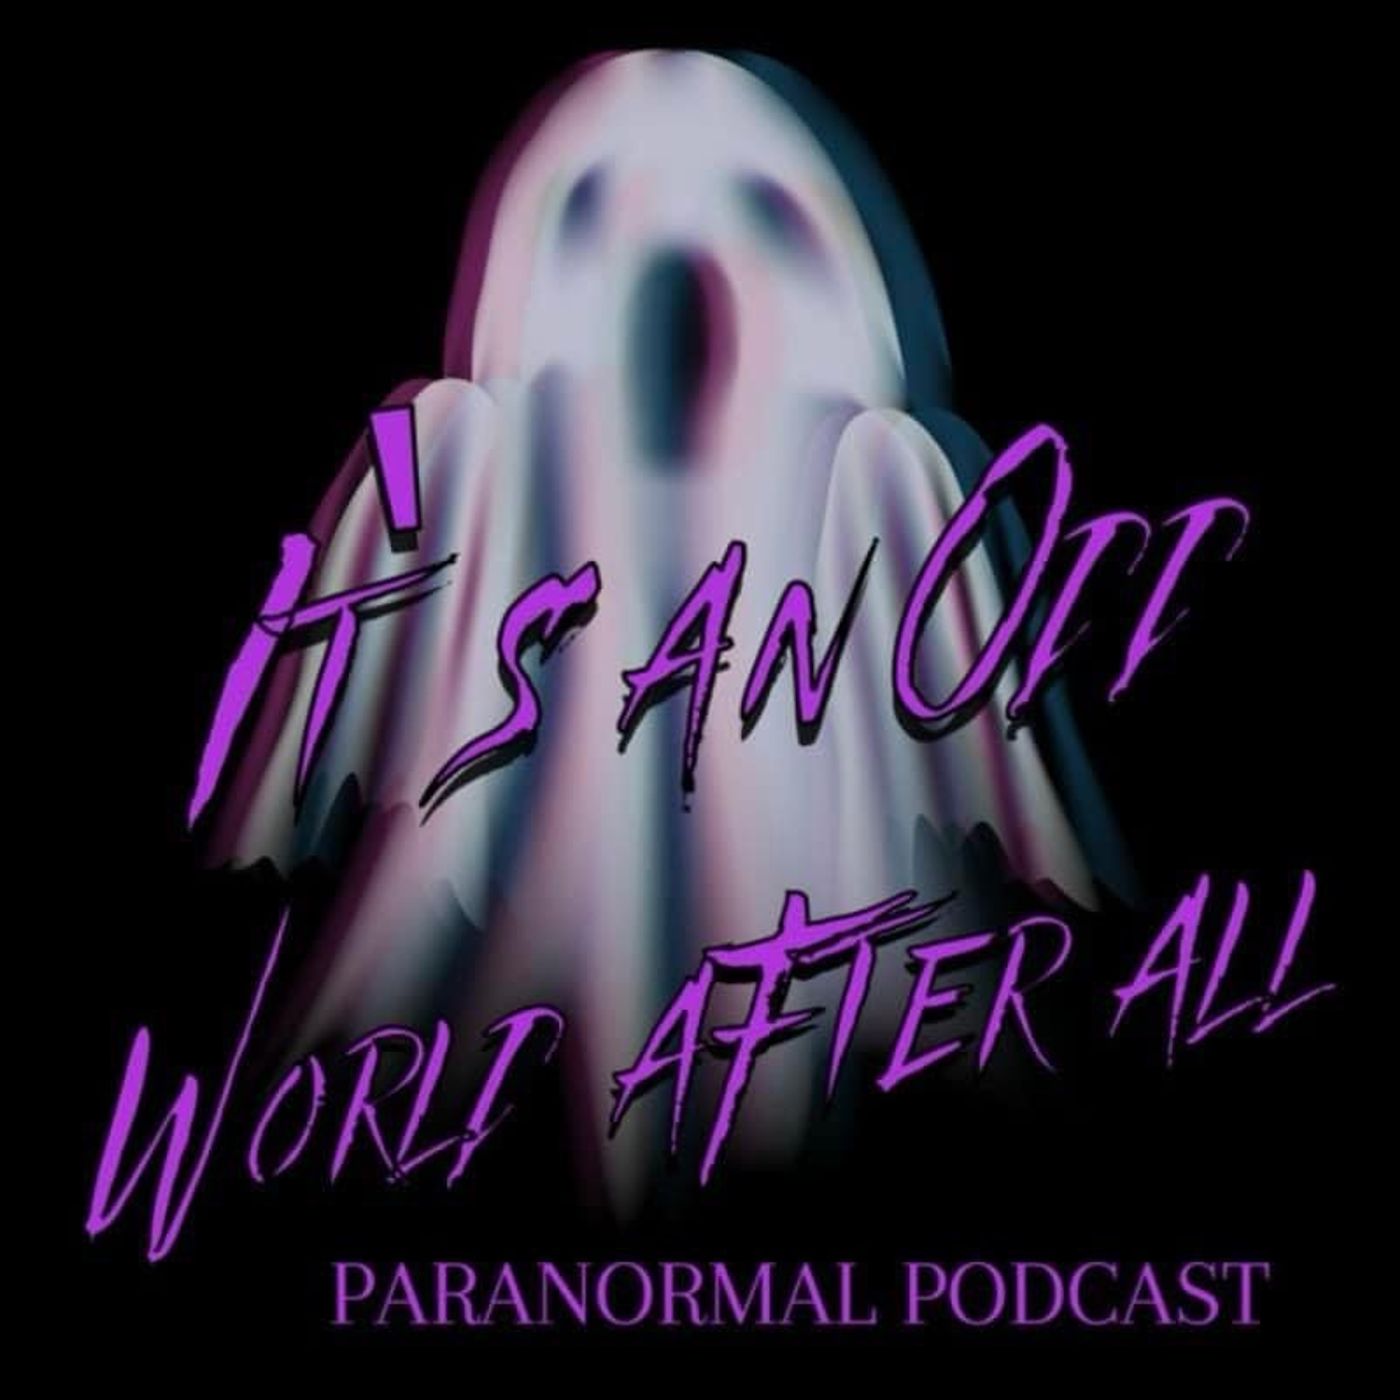 164: Guest Chat with Jensen (Paranormal Investigator and Host of ”It’s An Odd World After All” Podcast)